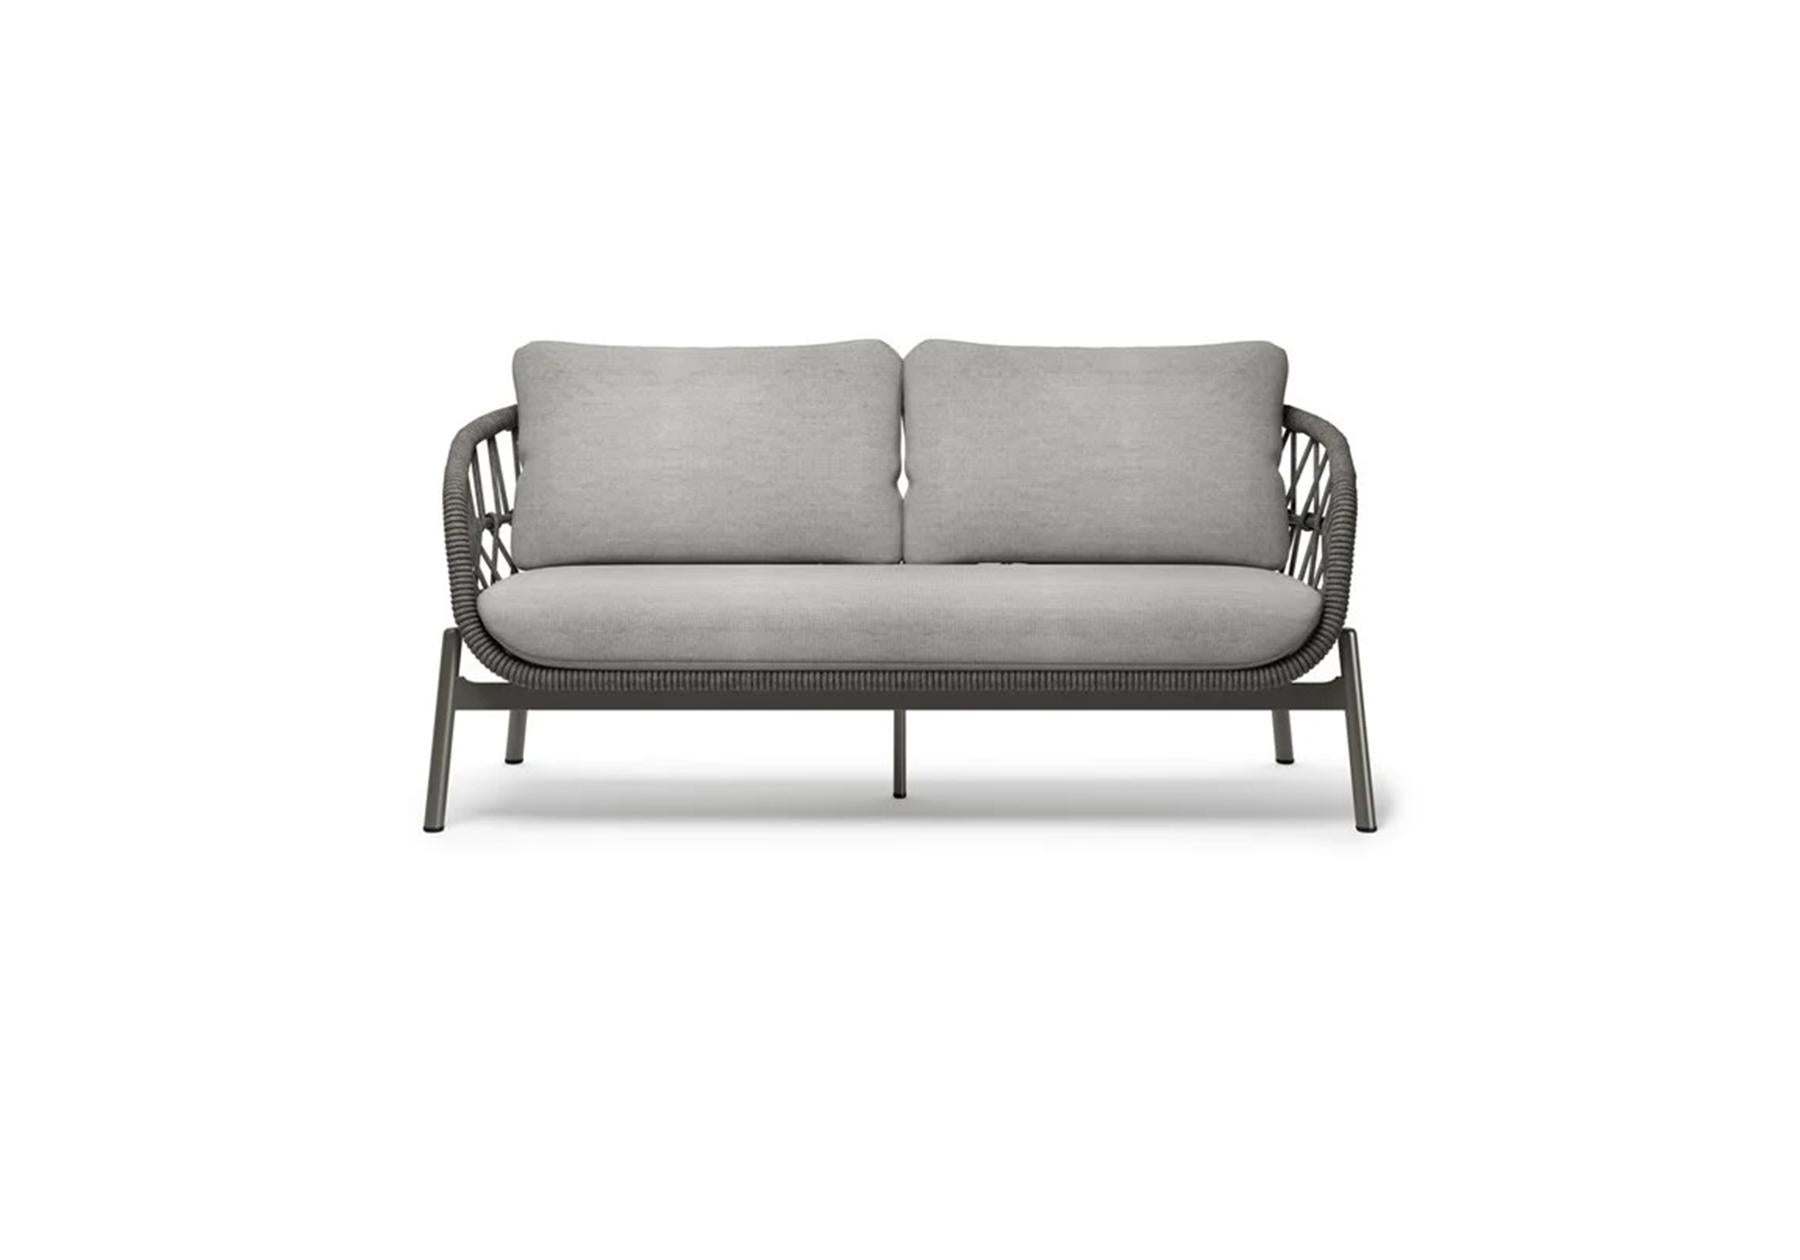 Hand-Crafted Gemma Double Sofa by Snoc